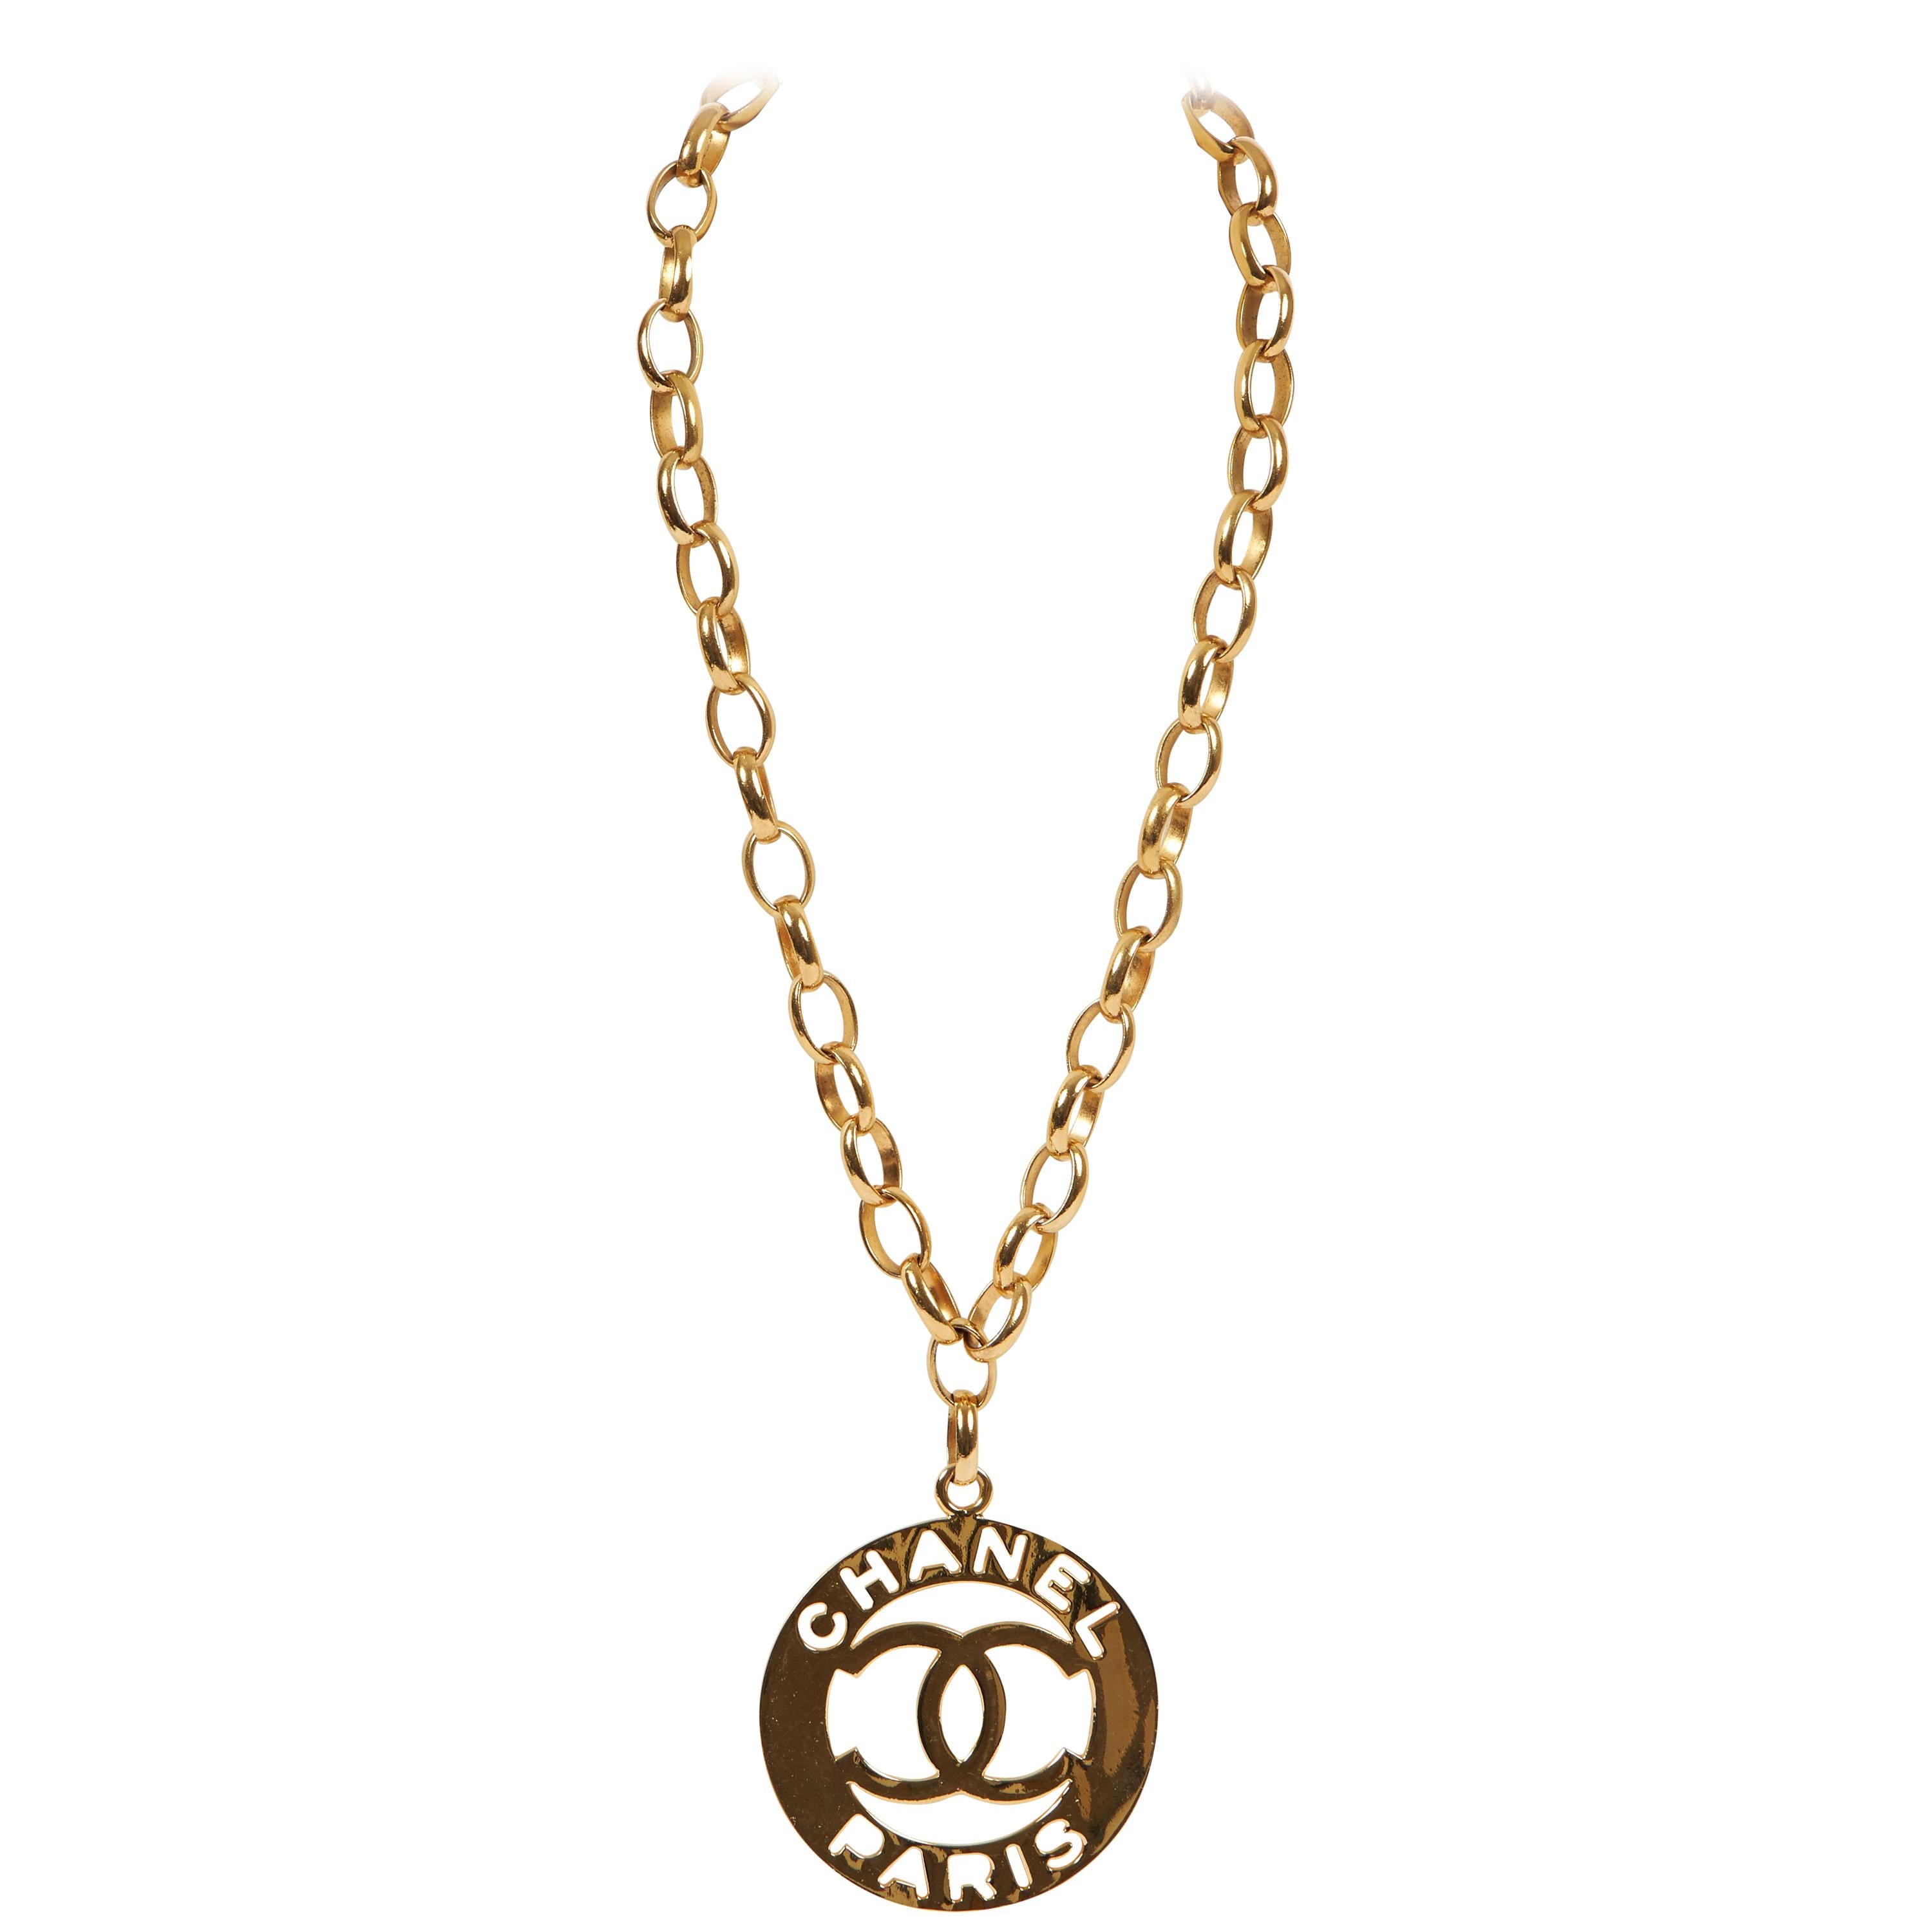 1970's Chanel Rare XLG Gold CC Pendant Necklace